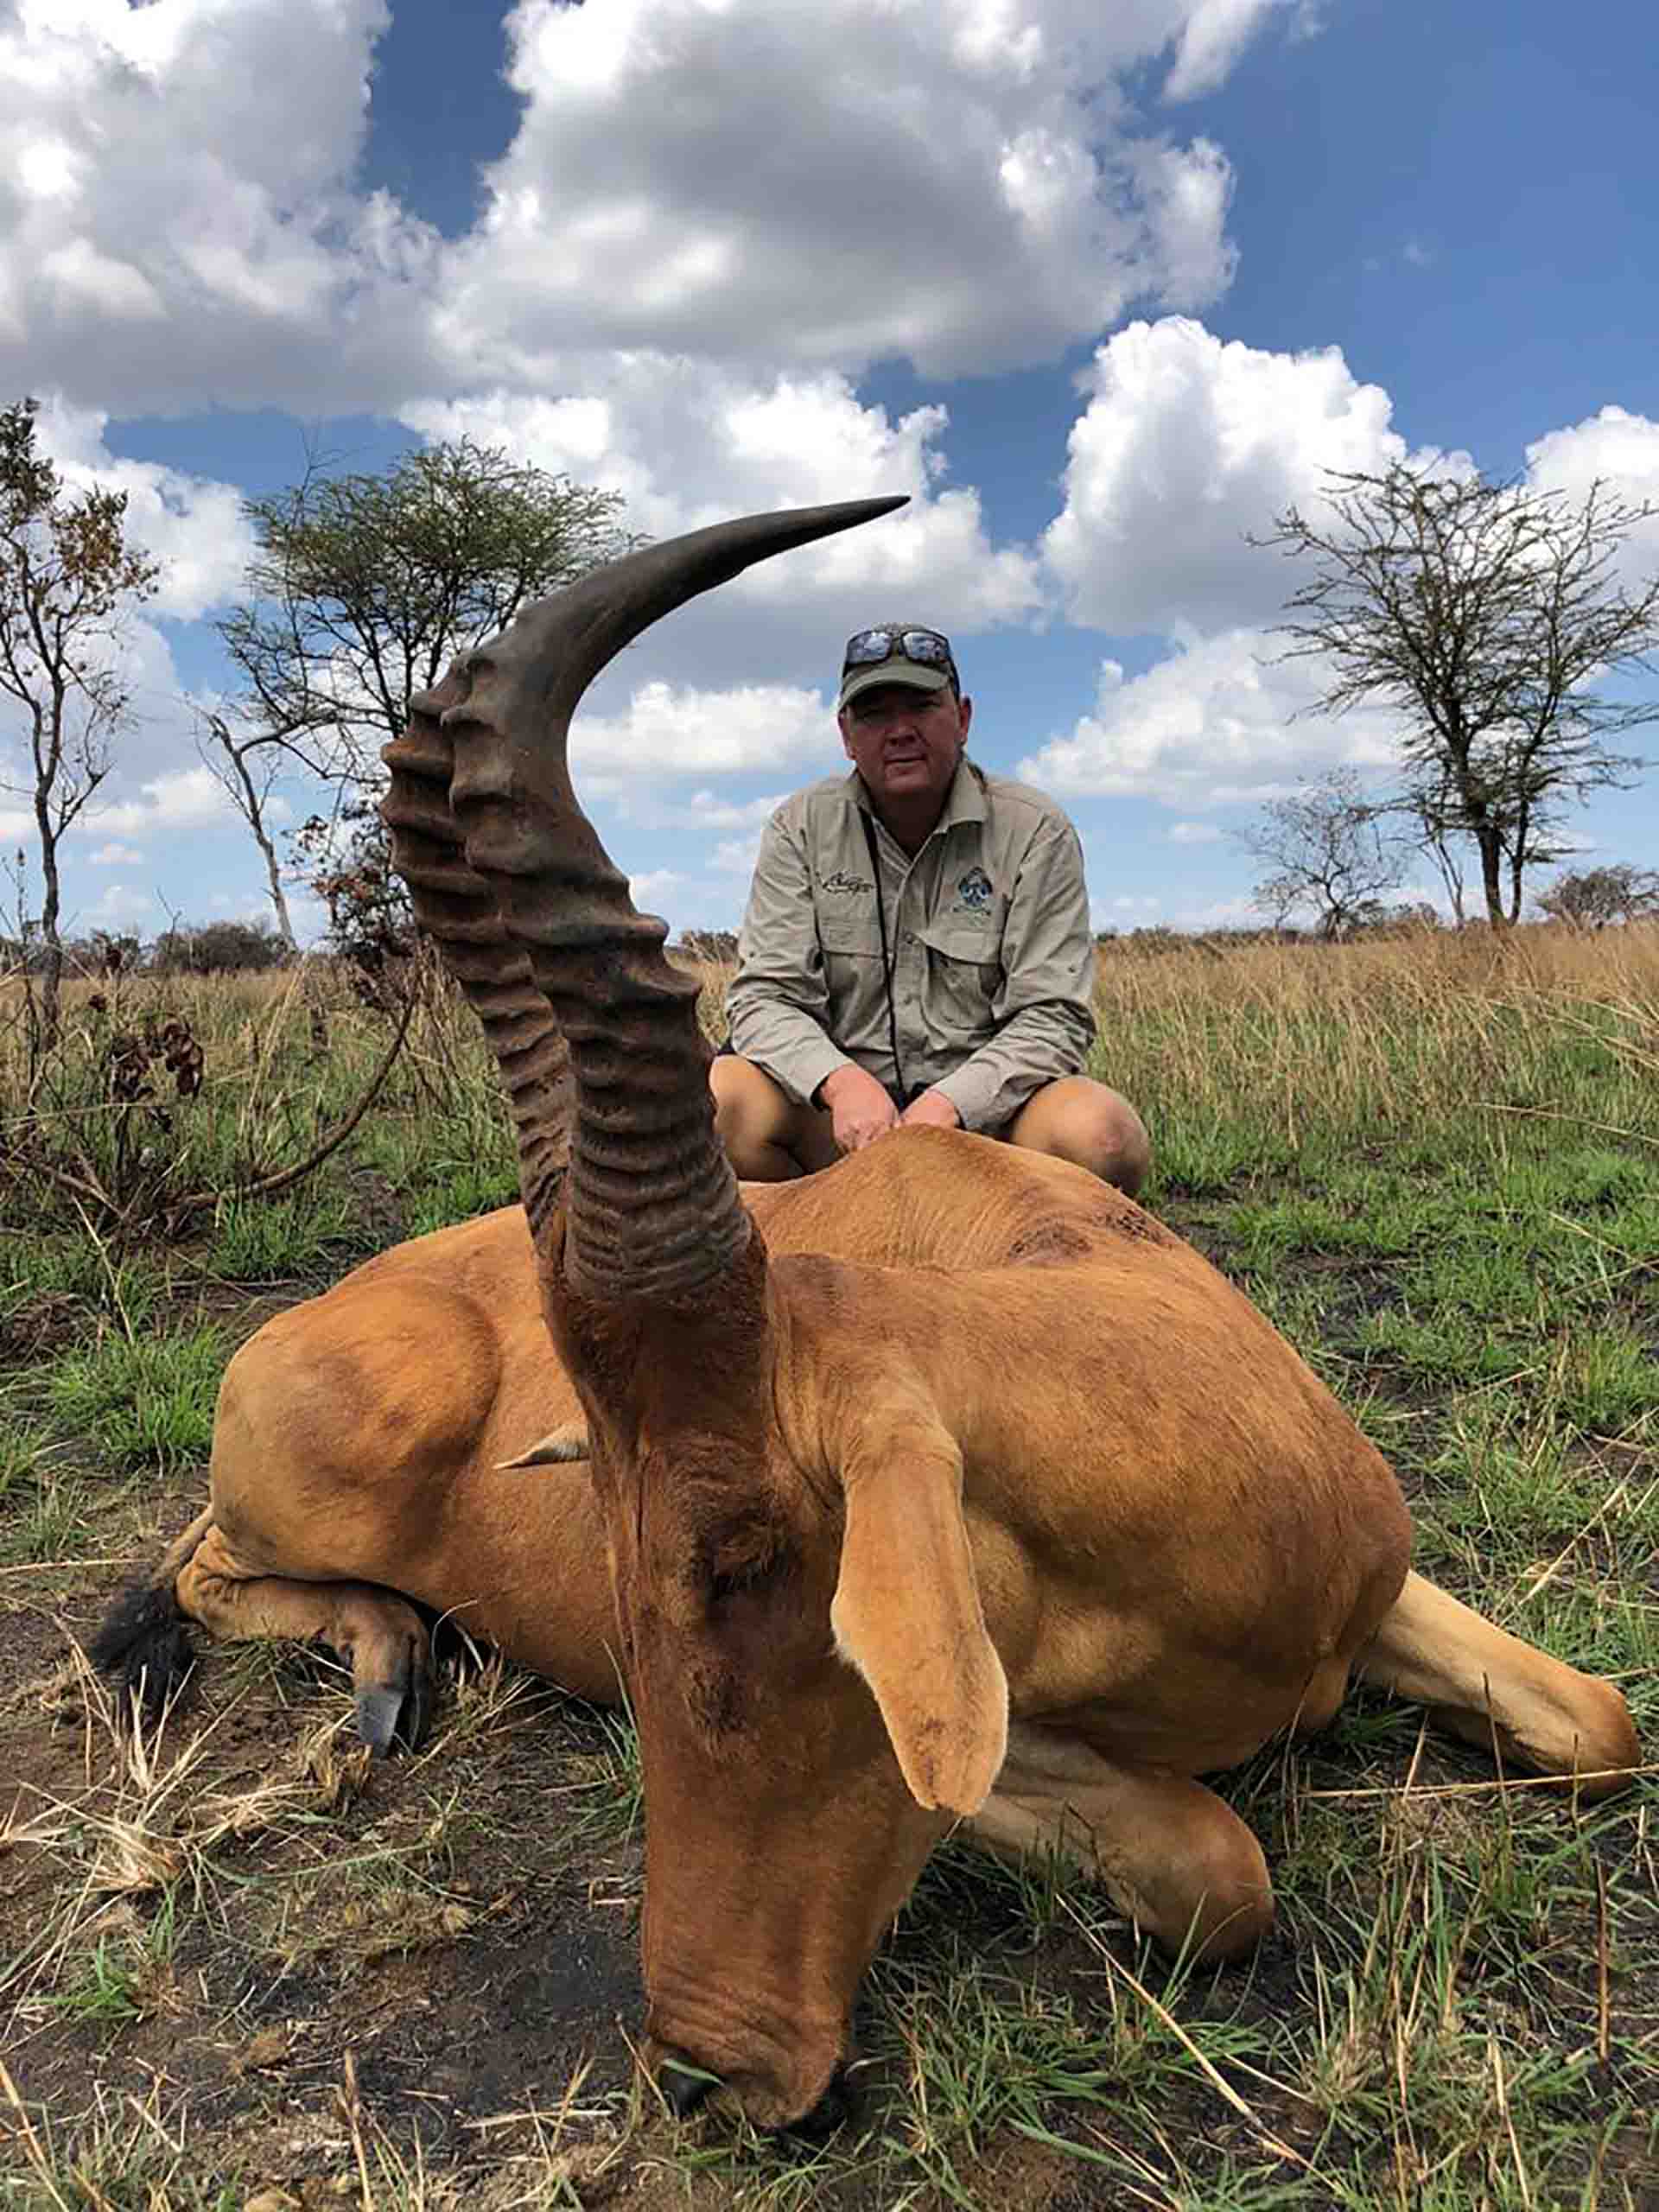 Latest hunting pictures - Nov 2018